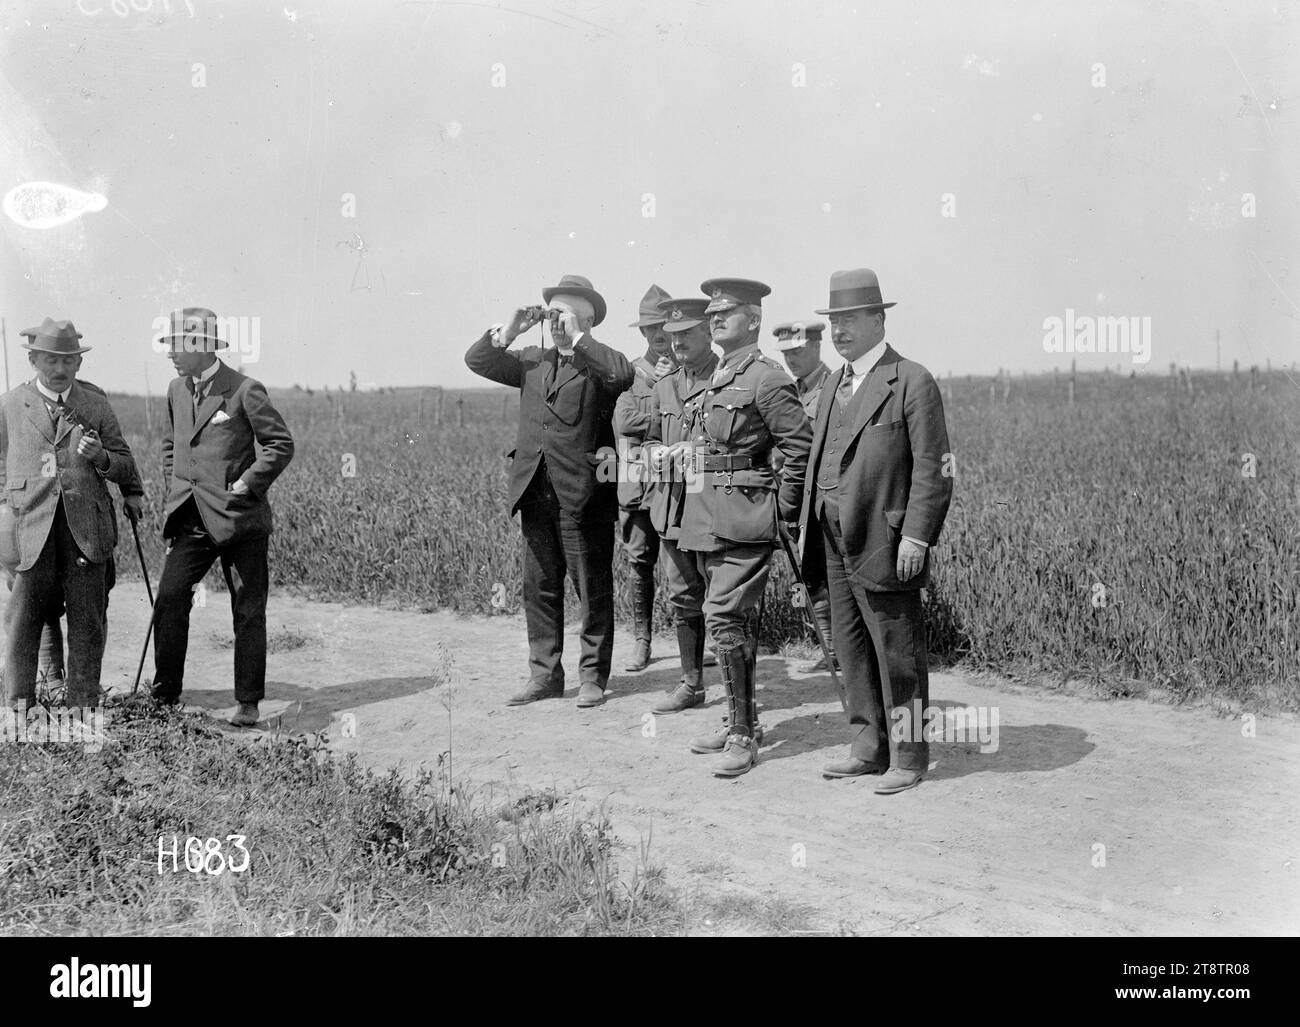 Prime Minister William Massey and Sir Joseph Ward observe New Zealand troop exercises, Bois-de-Warnimont, France, Prime Minister William Massey and Sir Joseph Ward observe tactical exercises of New Zealand troops at Bois-de-Warnimont in France during World War I. Massey watches through binoculars and Ward stands at far right. Photograph taken 30 June 1918 Stock Photo